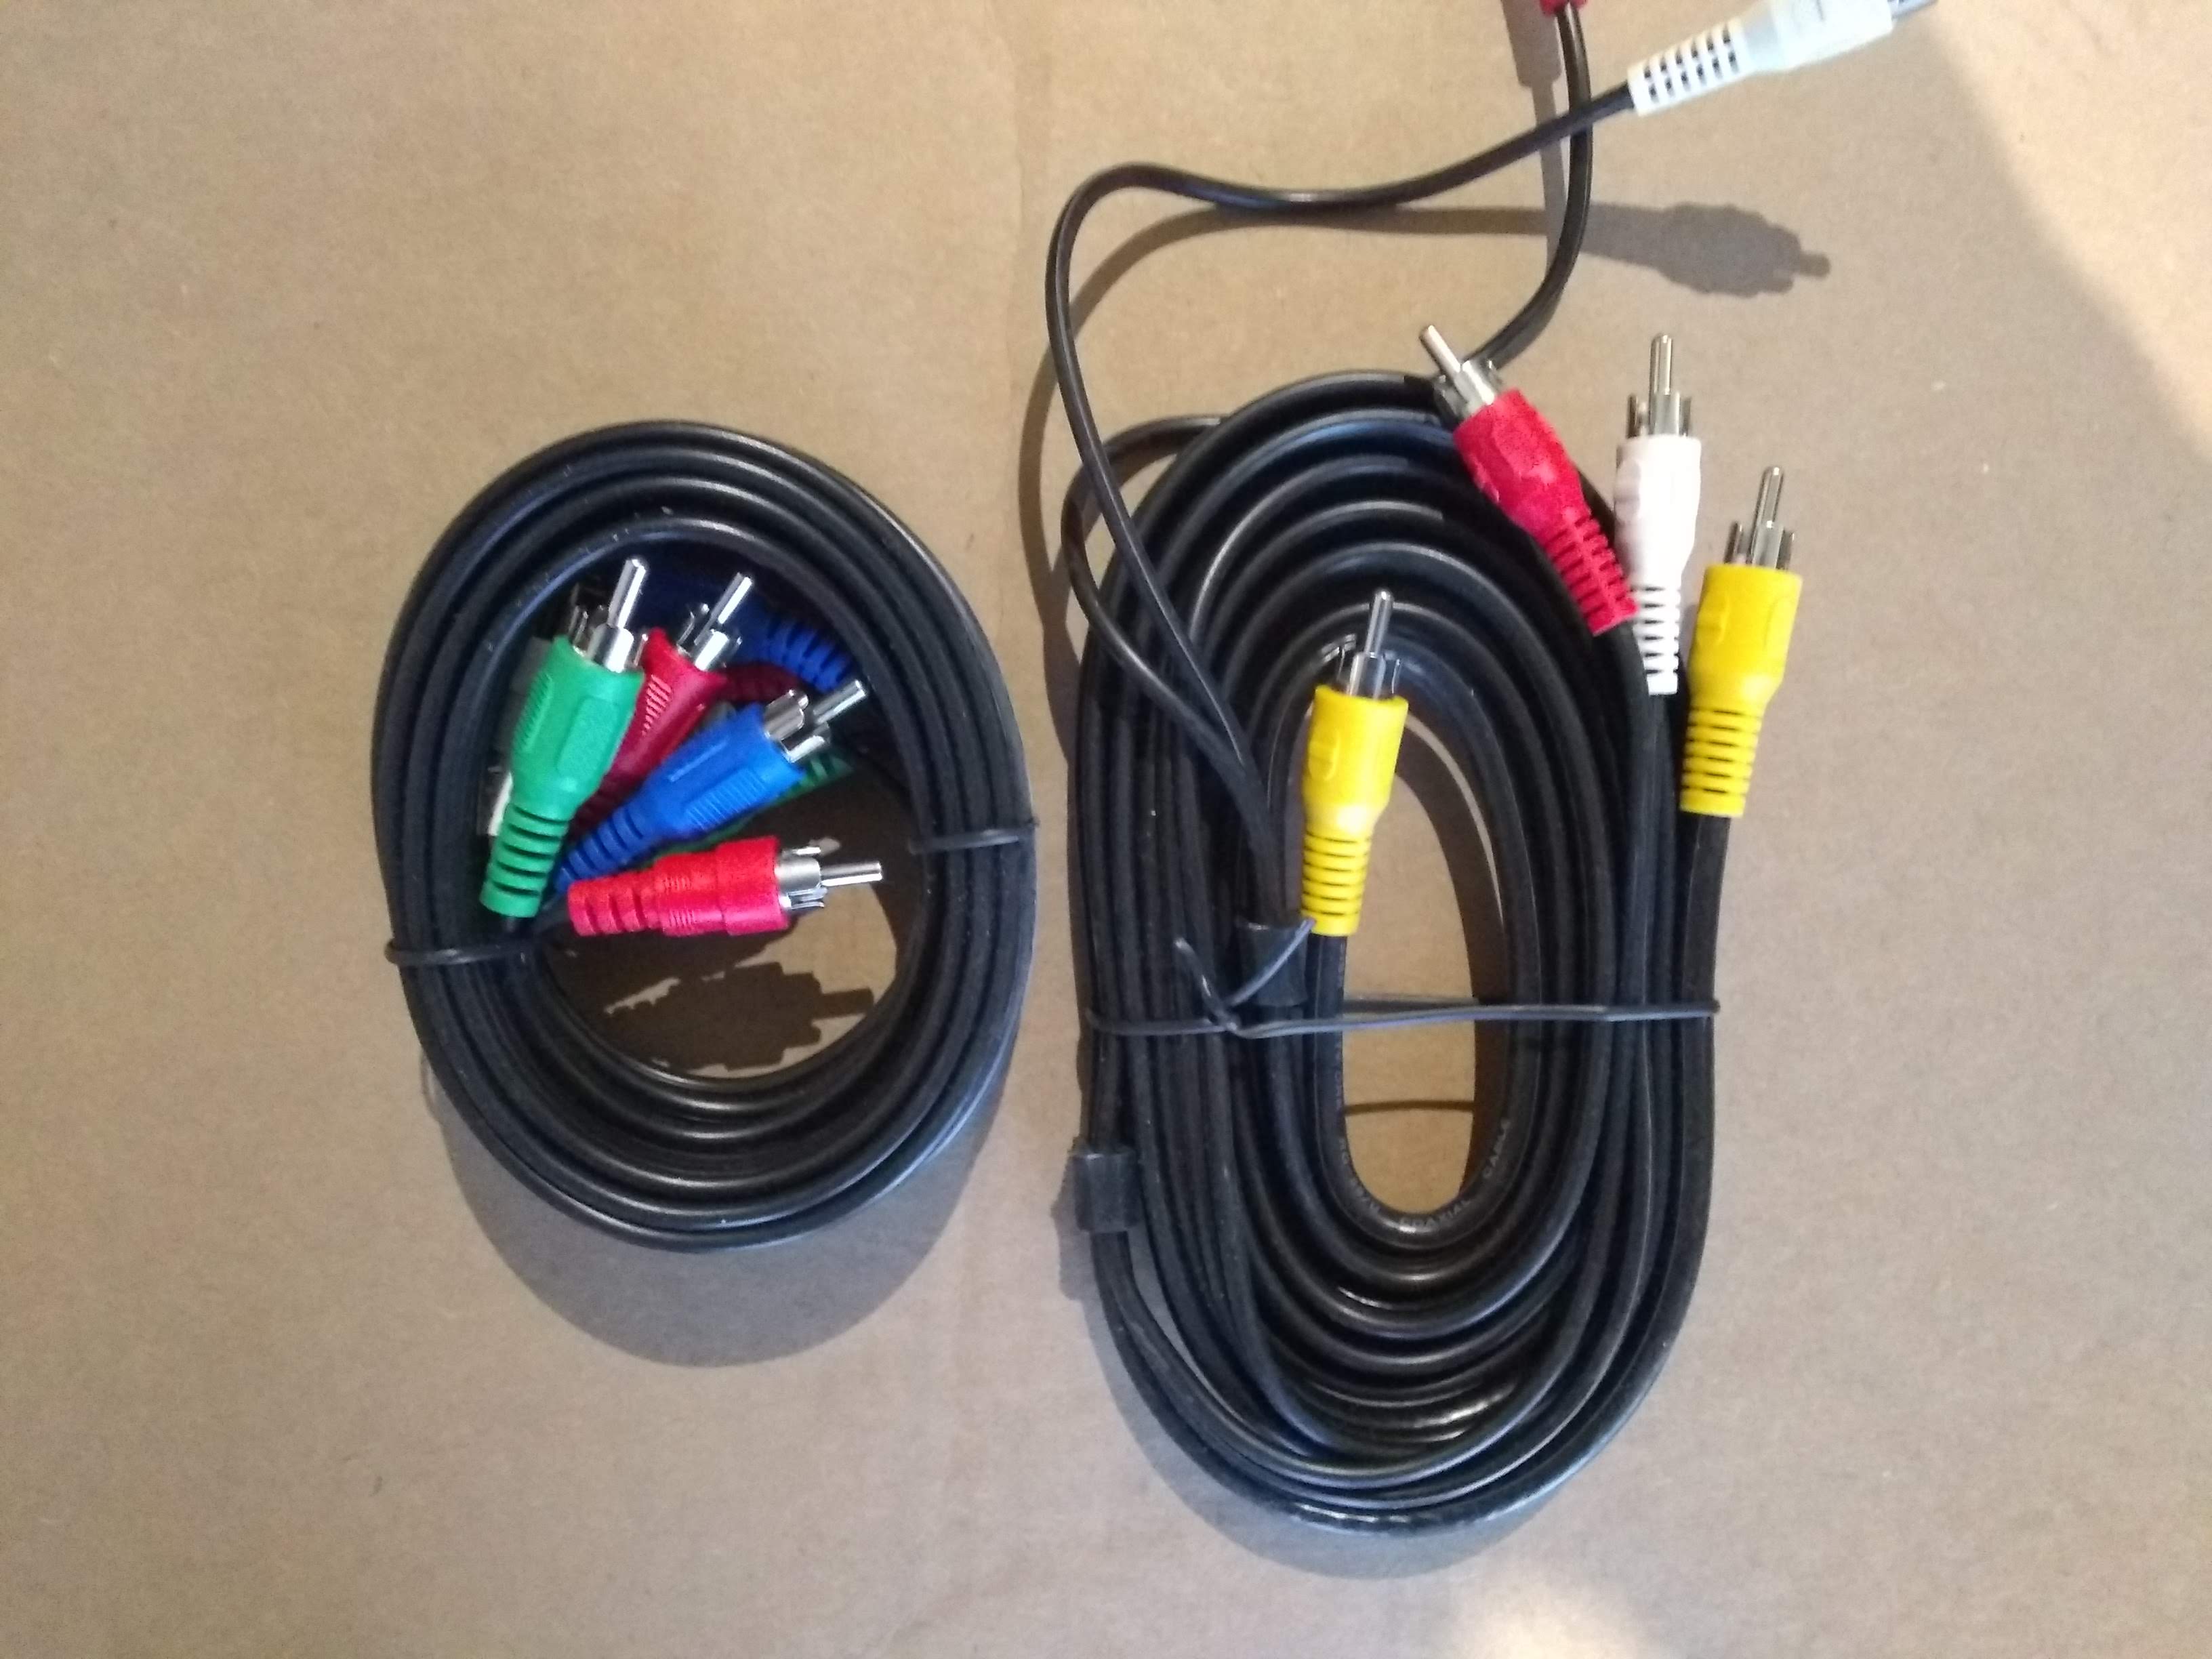 Cables, Video